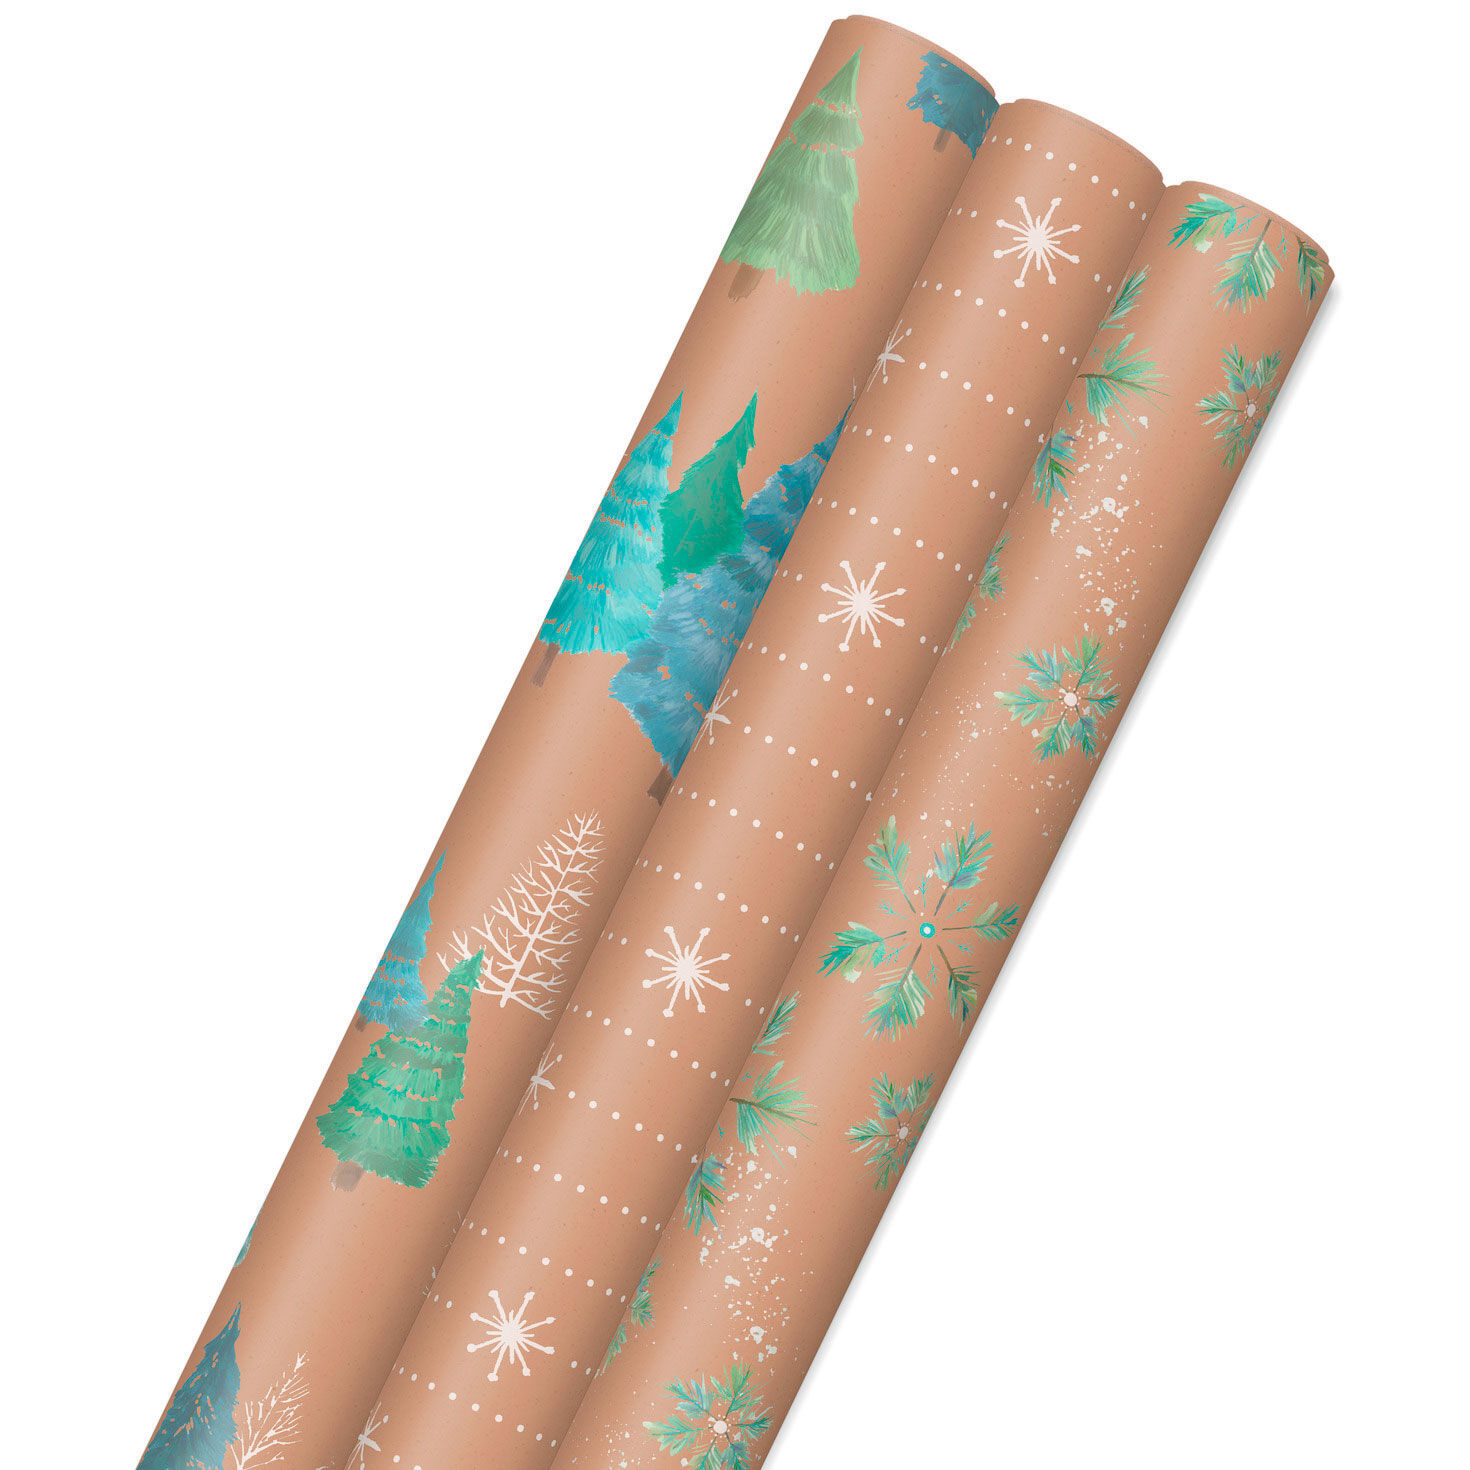 8 Rolls Christmas Wrapping Paper Christmas Gift Wrapping Papers Kraft Gift  Packing Paper Winter Birthday Holiday Christmas Gift Paper Christmas Theme  Pattern Wrap Paper 